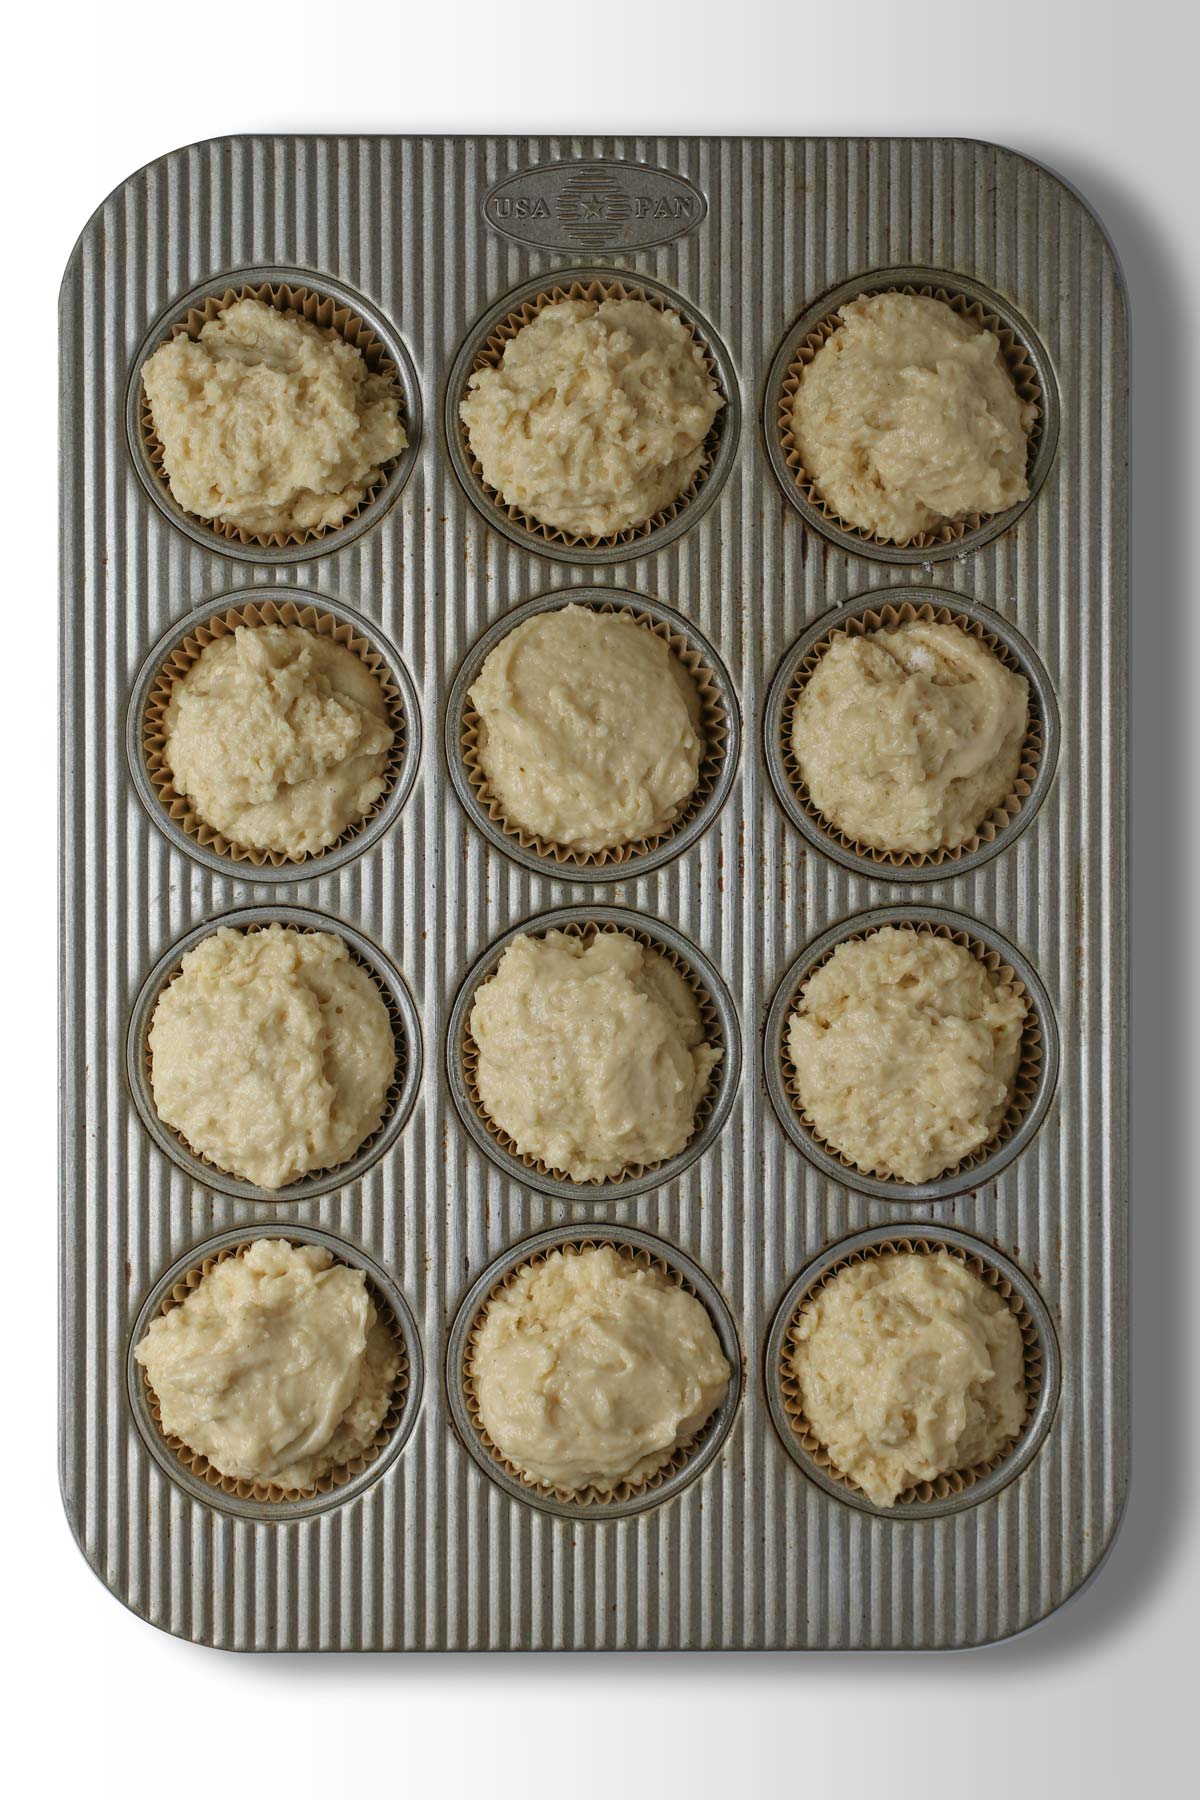 muffin batter scooped into baking pans.